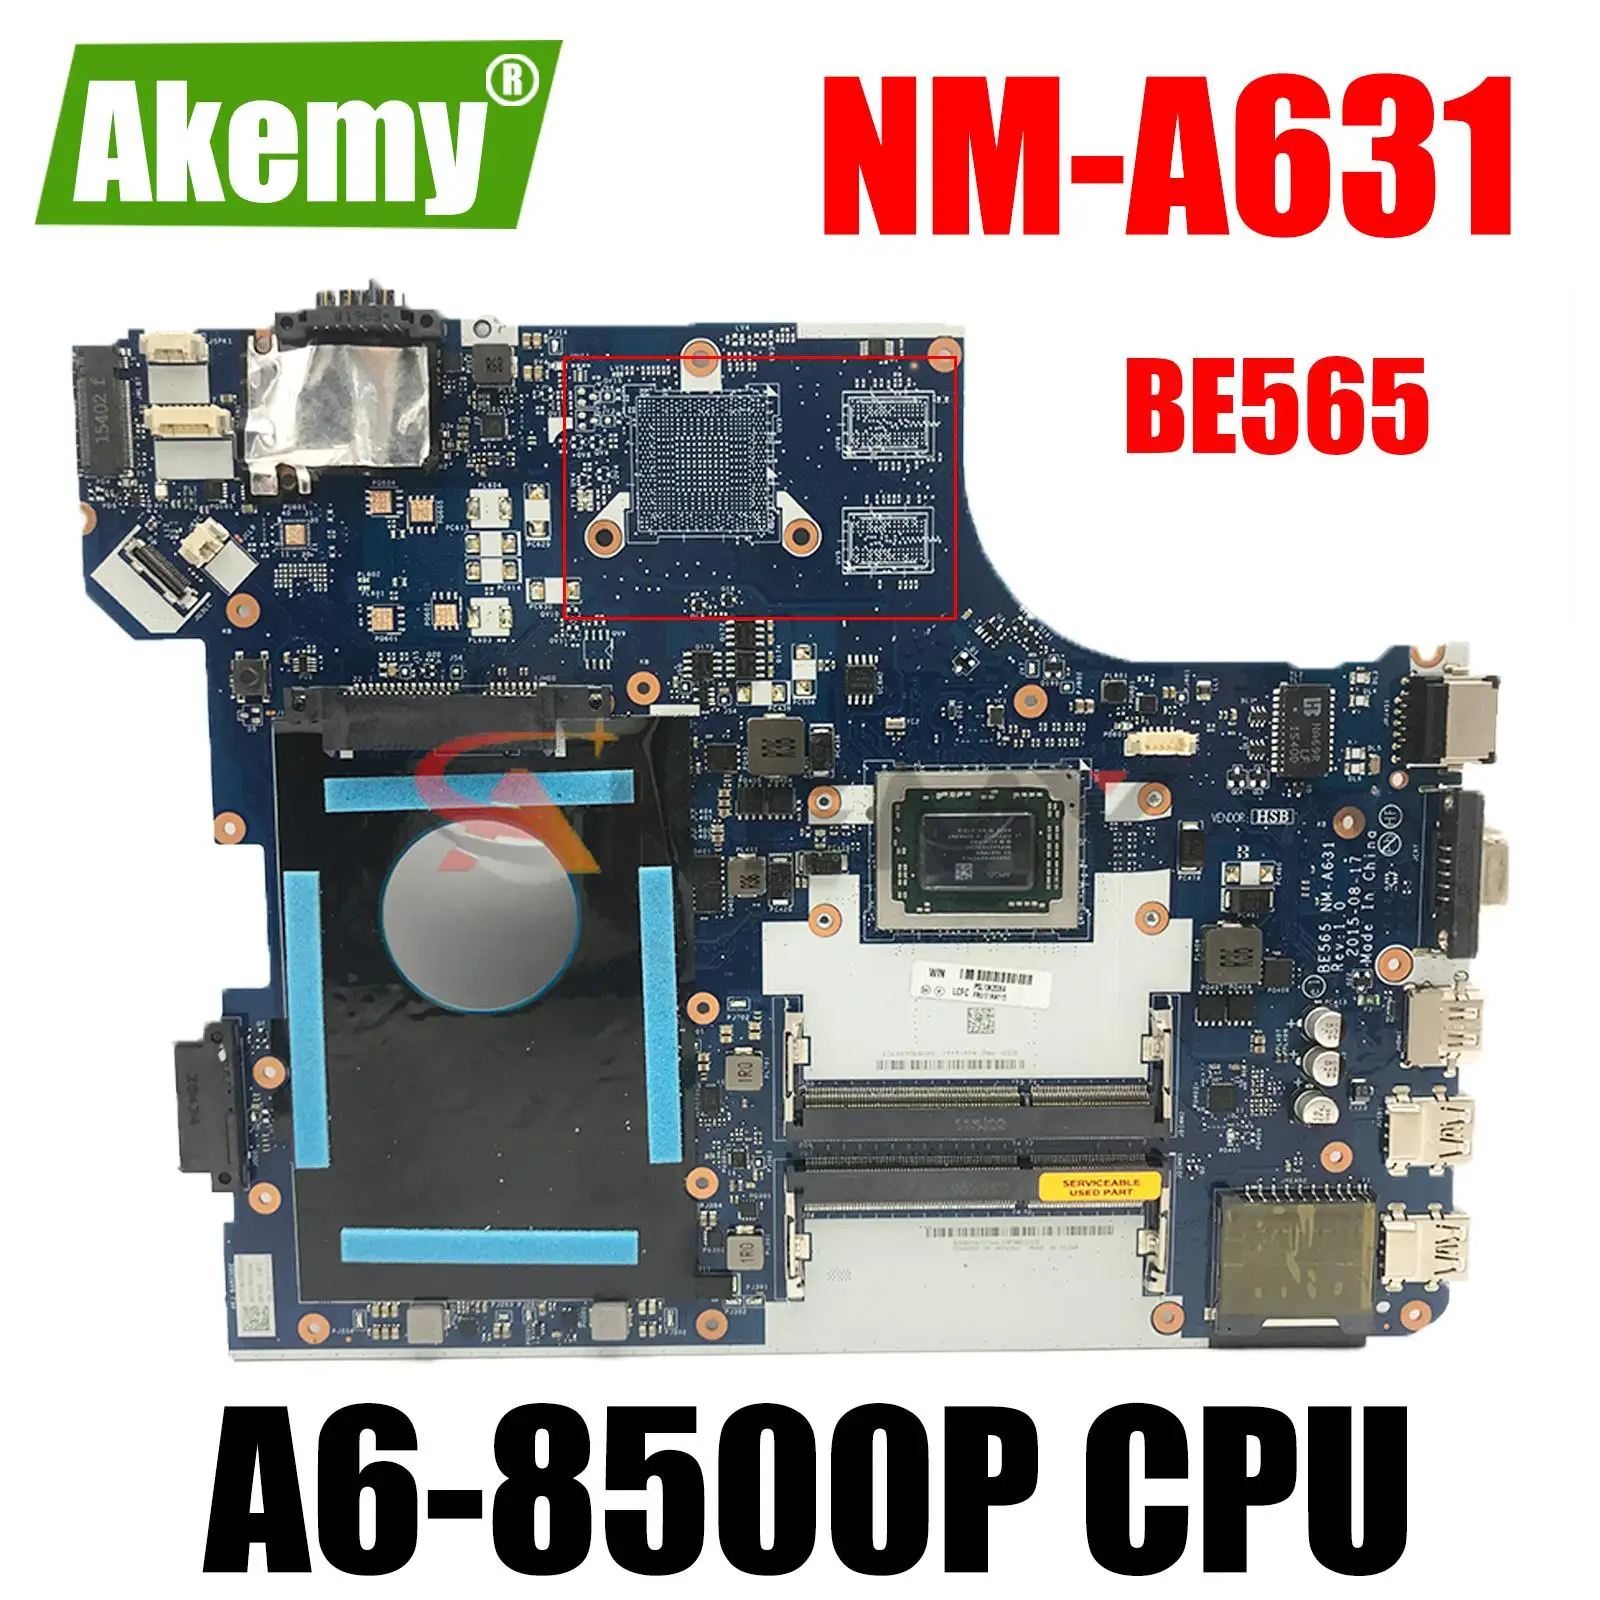 

A6-8500P for Lenovo ThinkPad E565 20EY 100% Tested Laptop Integrated Motherboard BE565 NM-A631 CPU DDR3 FRU PN 01AW115 01AW114